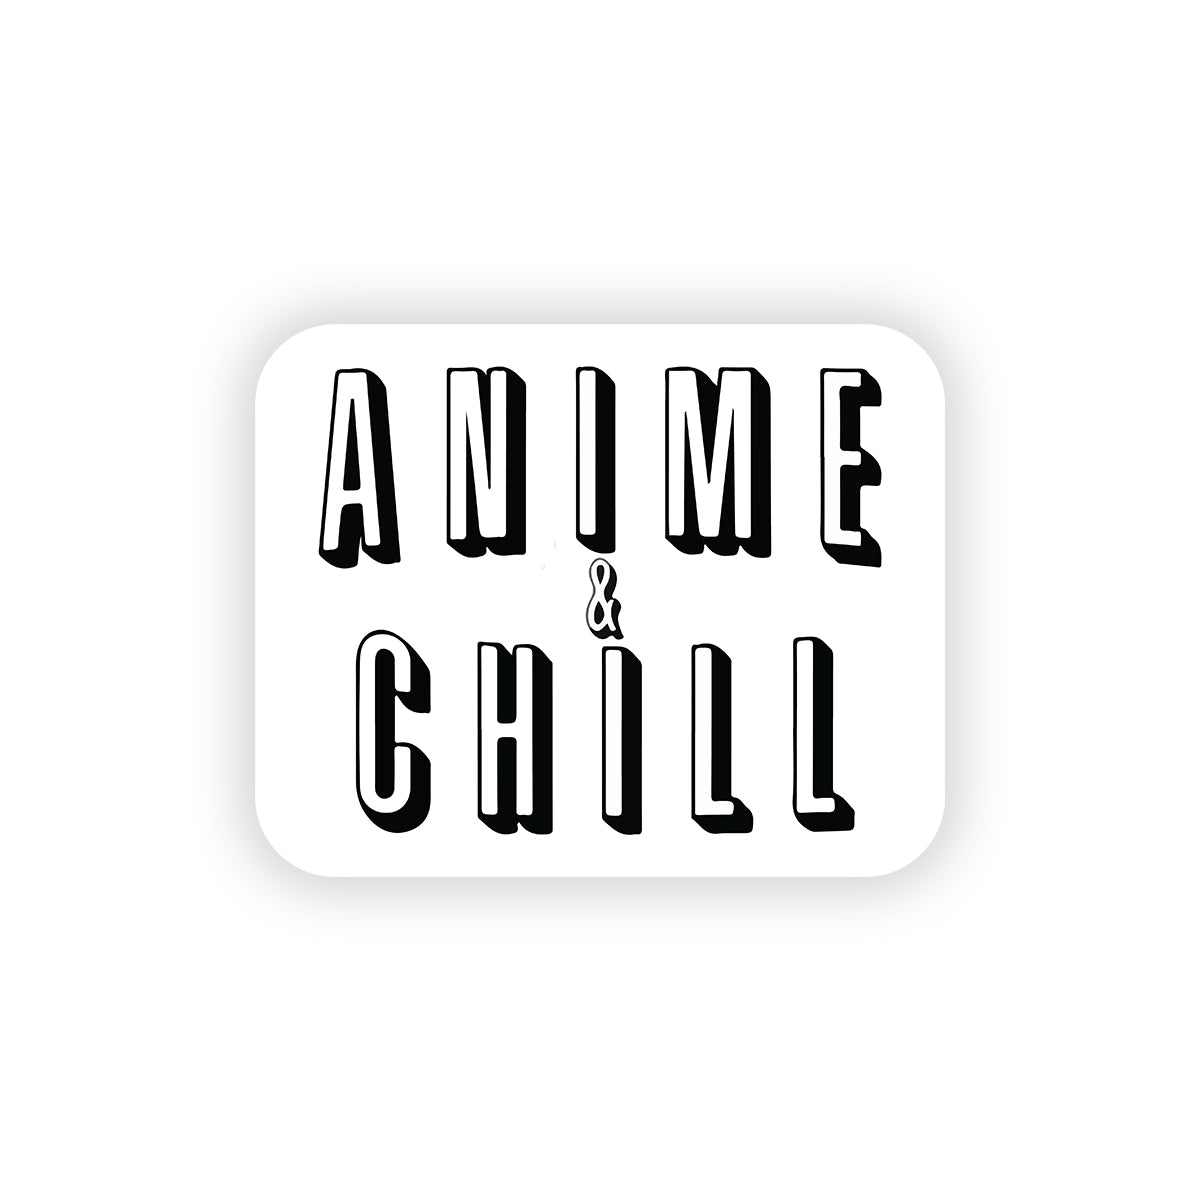 Anime and chill